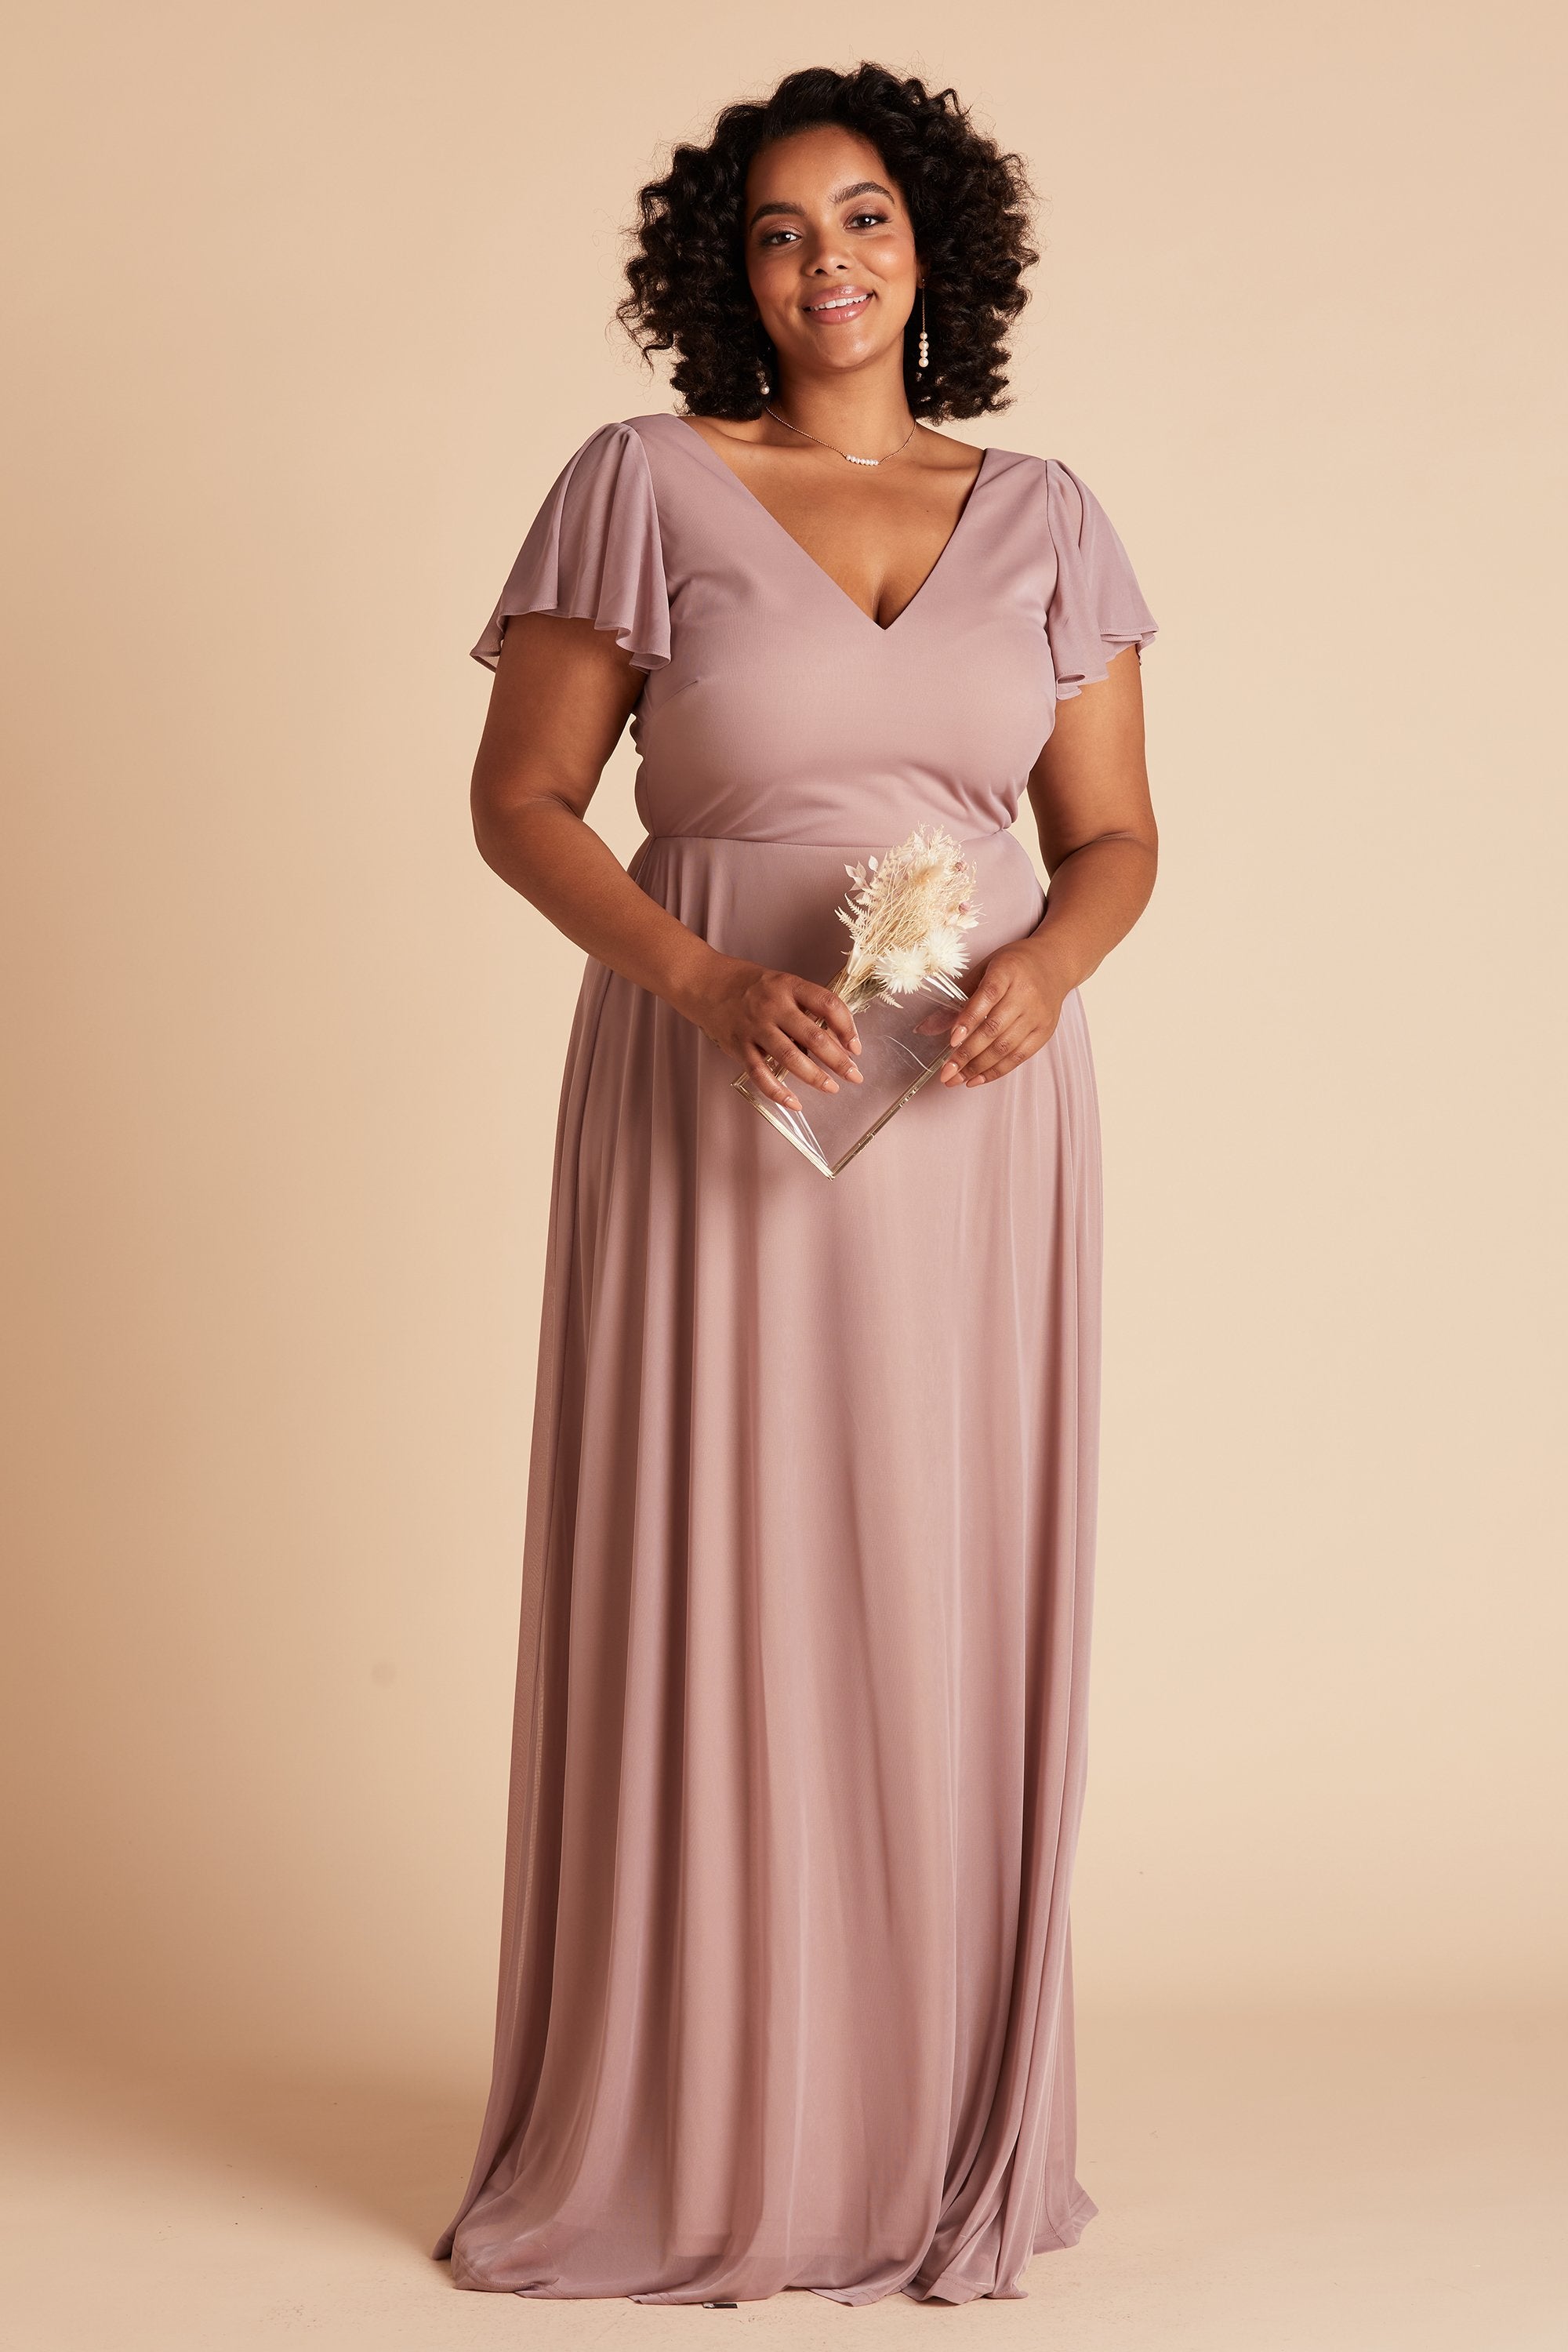 Hannah plus size bridesmaids dress in mauve mesh by Birdy Grey, front view